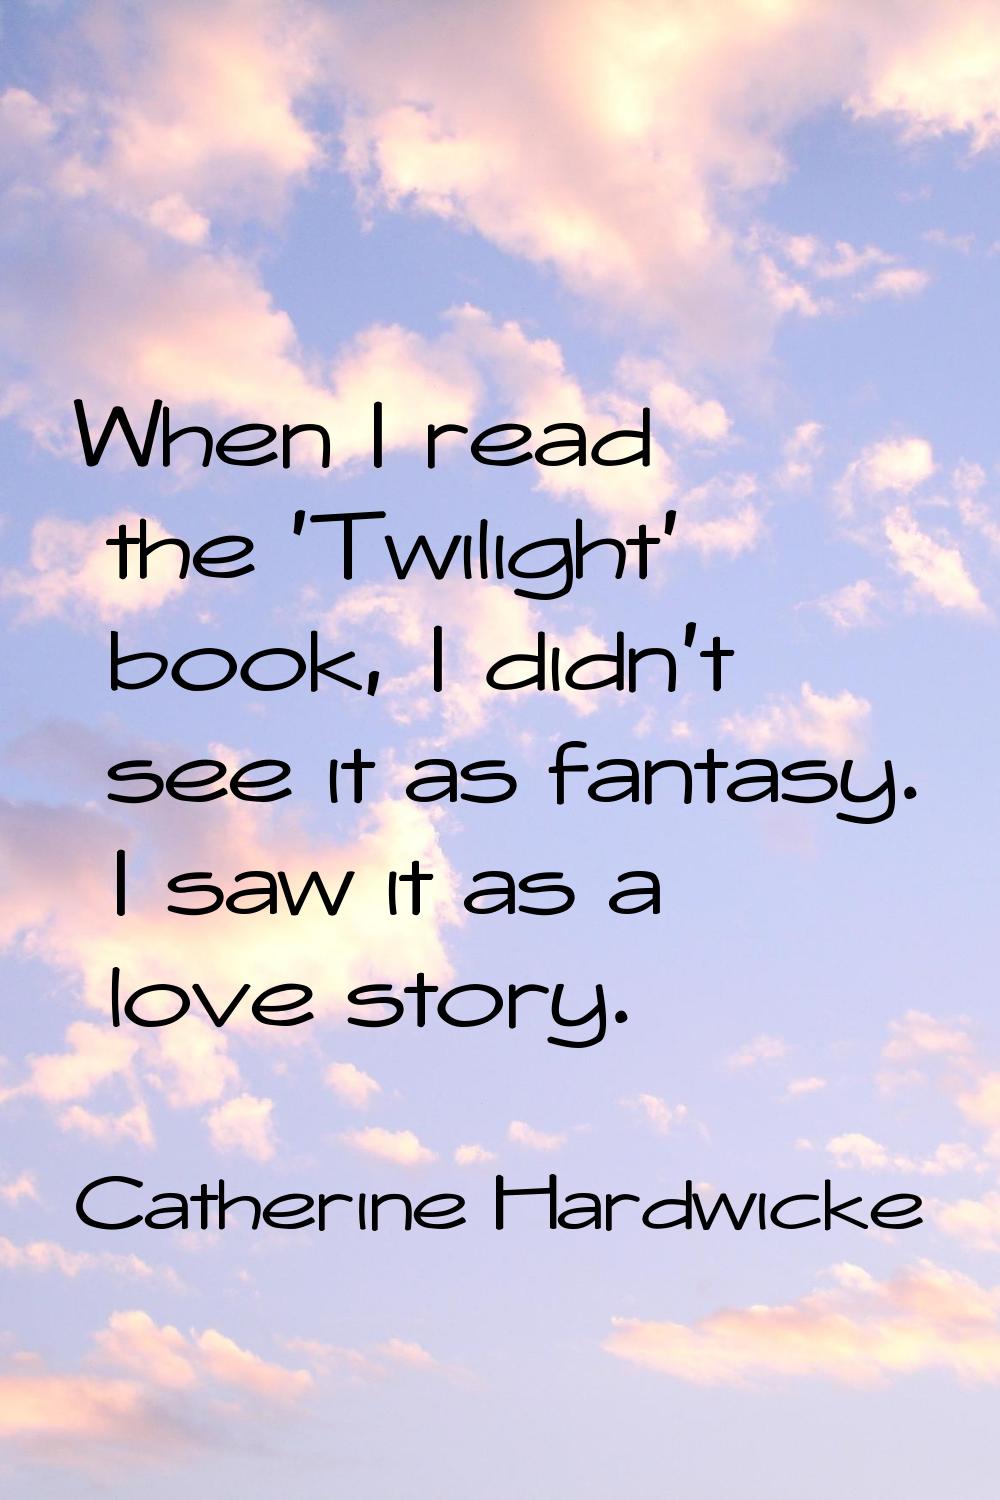 When I read the 'Twilight' book, I didn't see it as fantasy. I saw it as a love story.